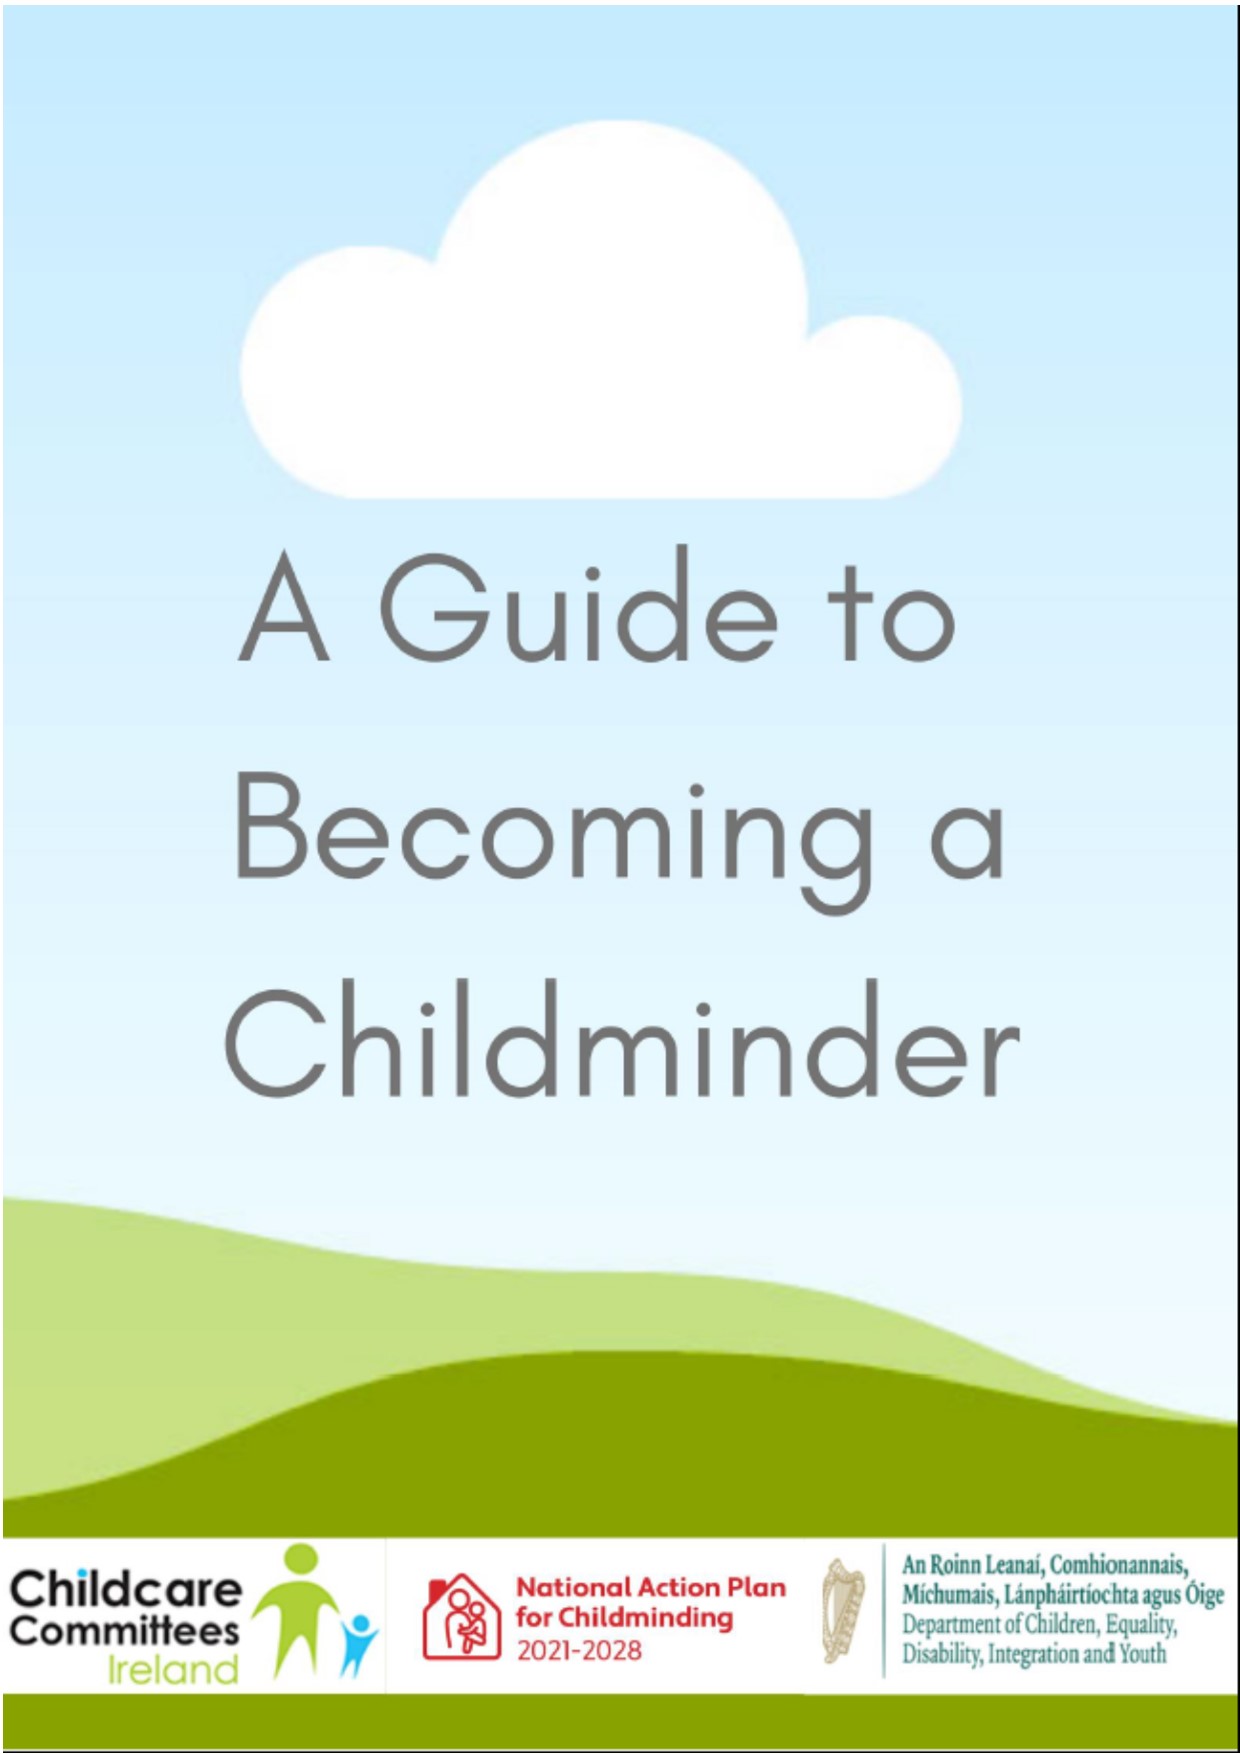 A Guide to Becoming a Childminder